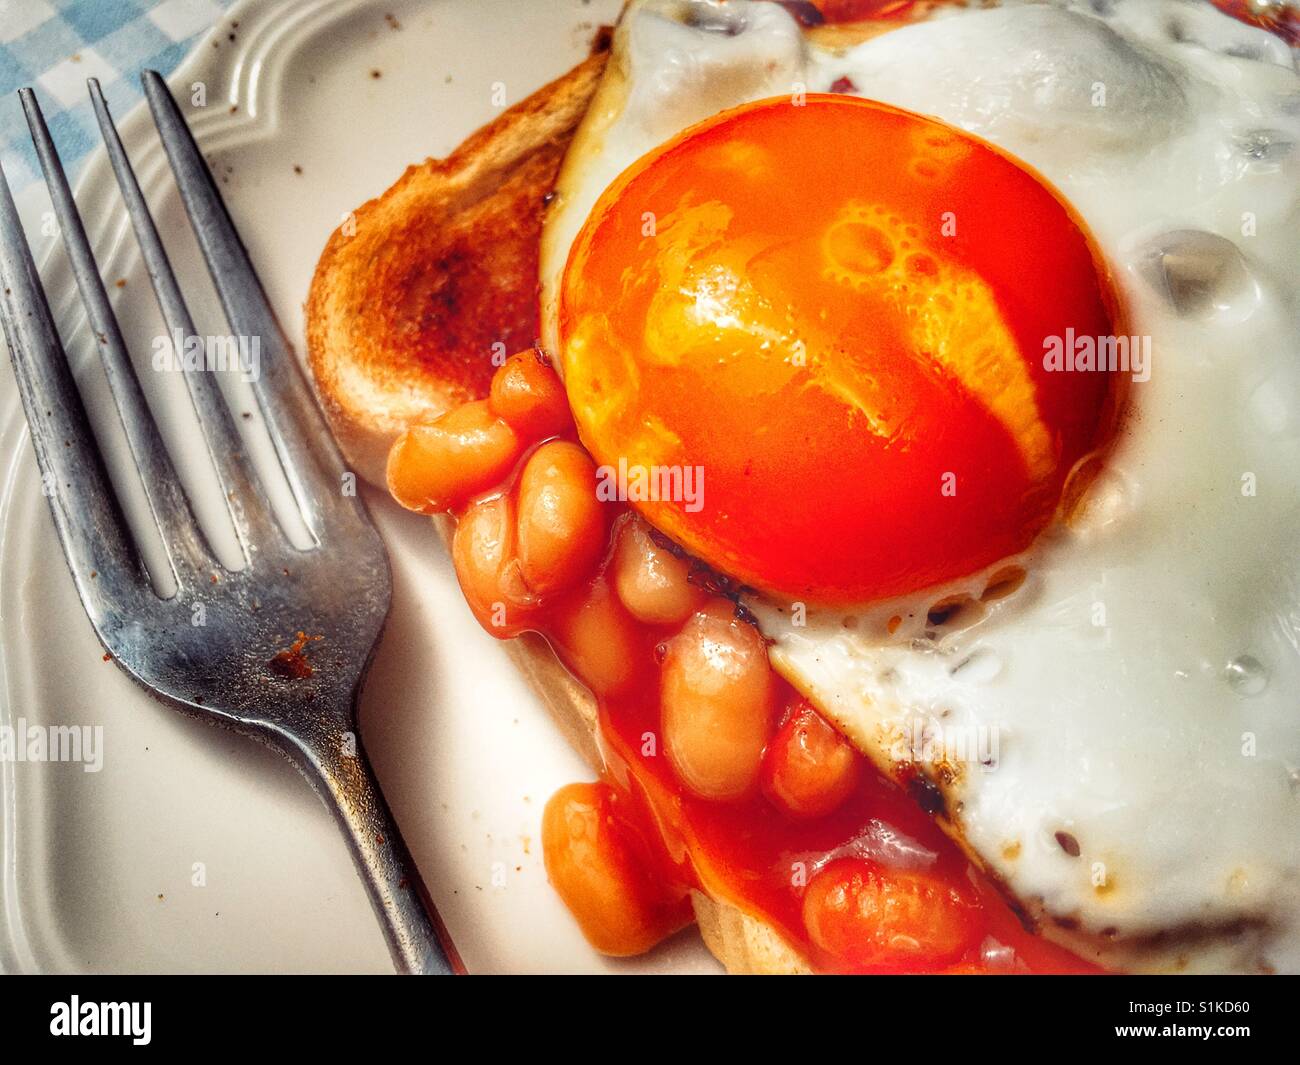 Baked beans on toast with fried egg Stock Photo